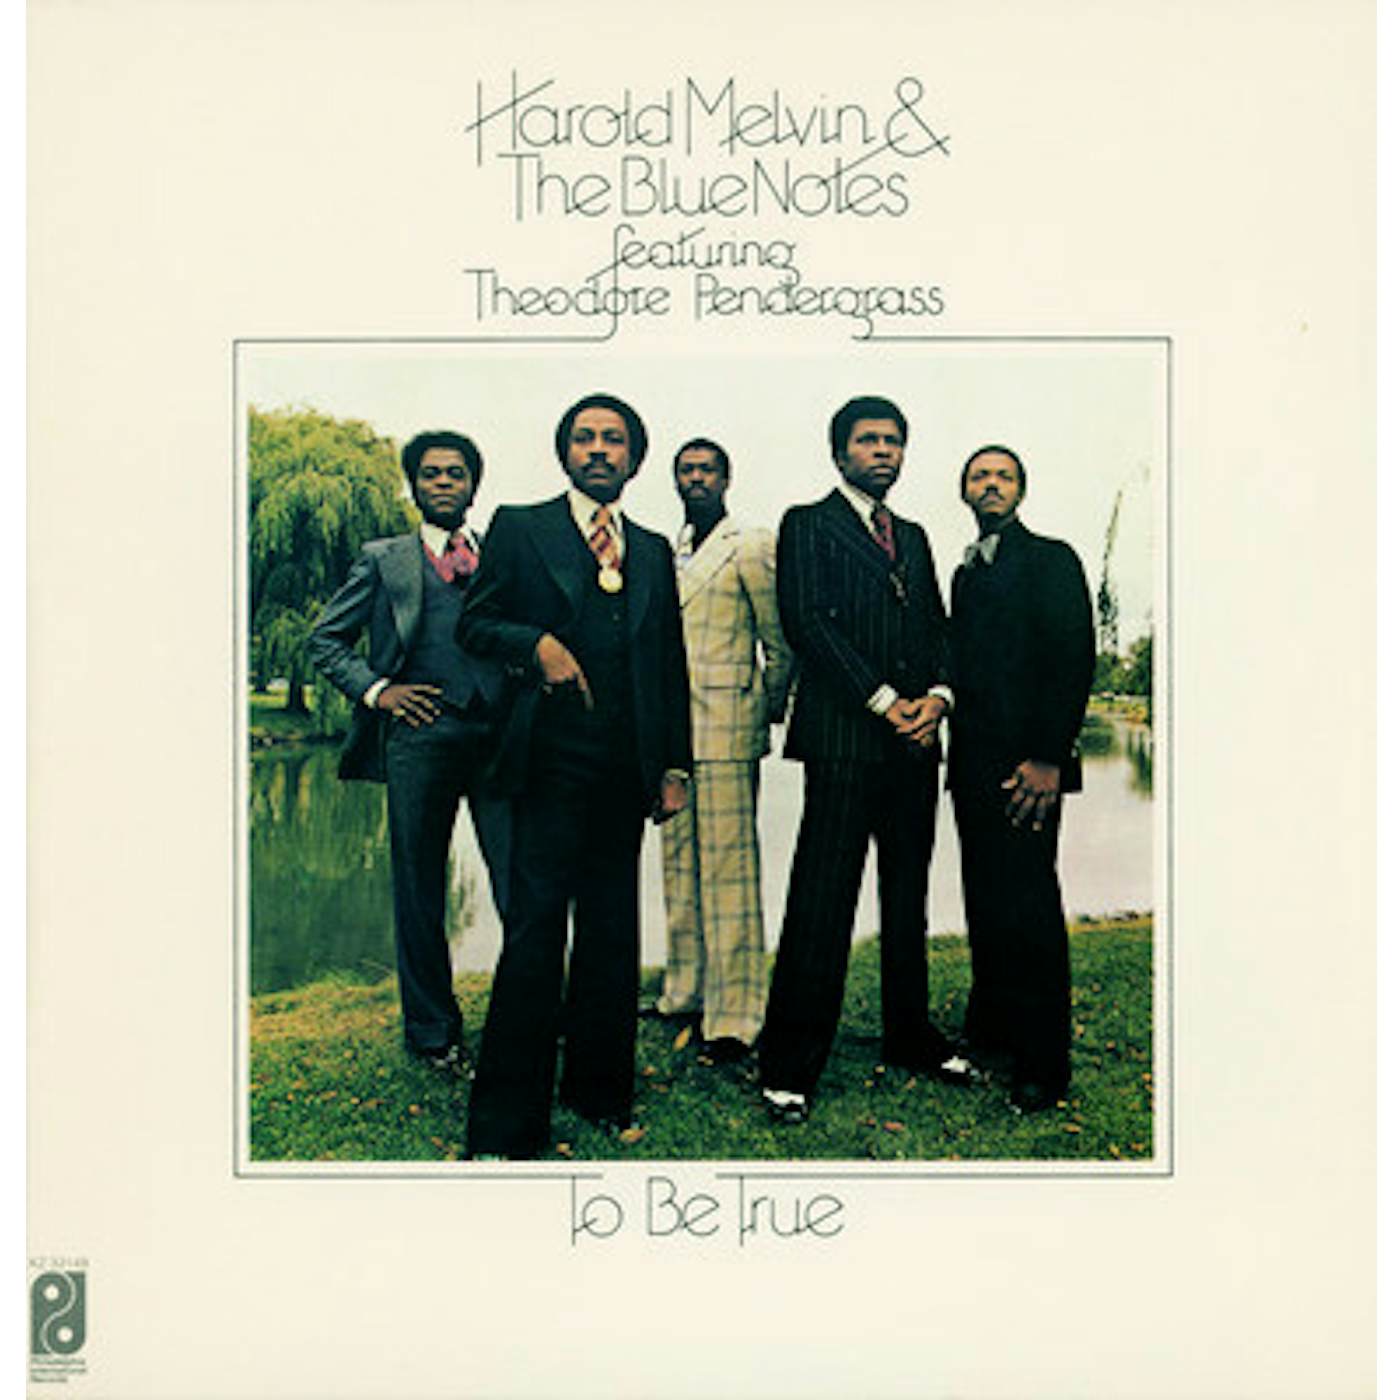 Harold Melvin & The Blue Notes TO BE TRUE CD